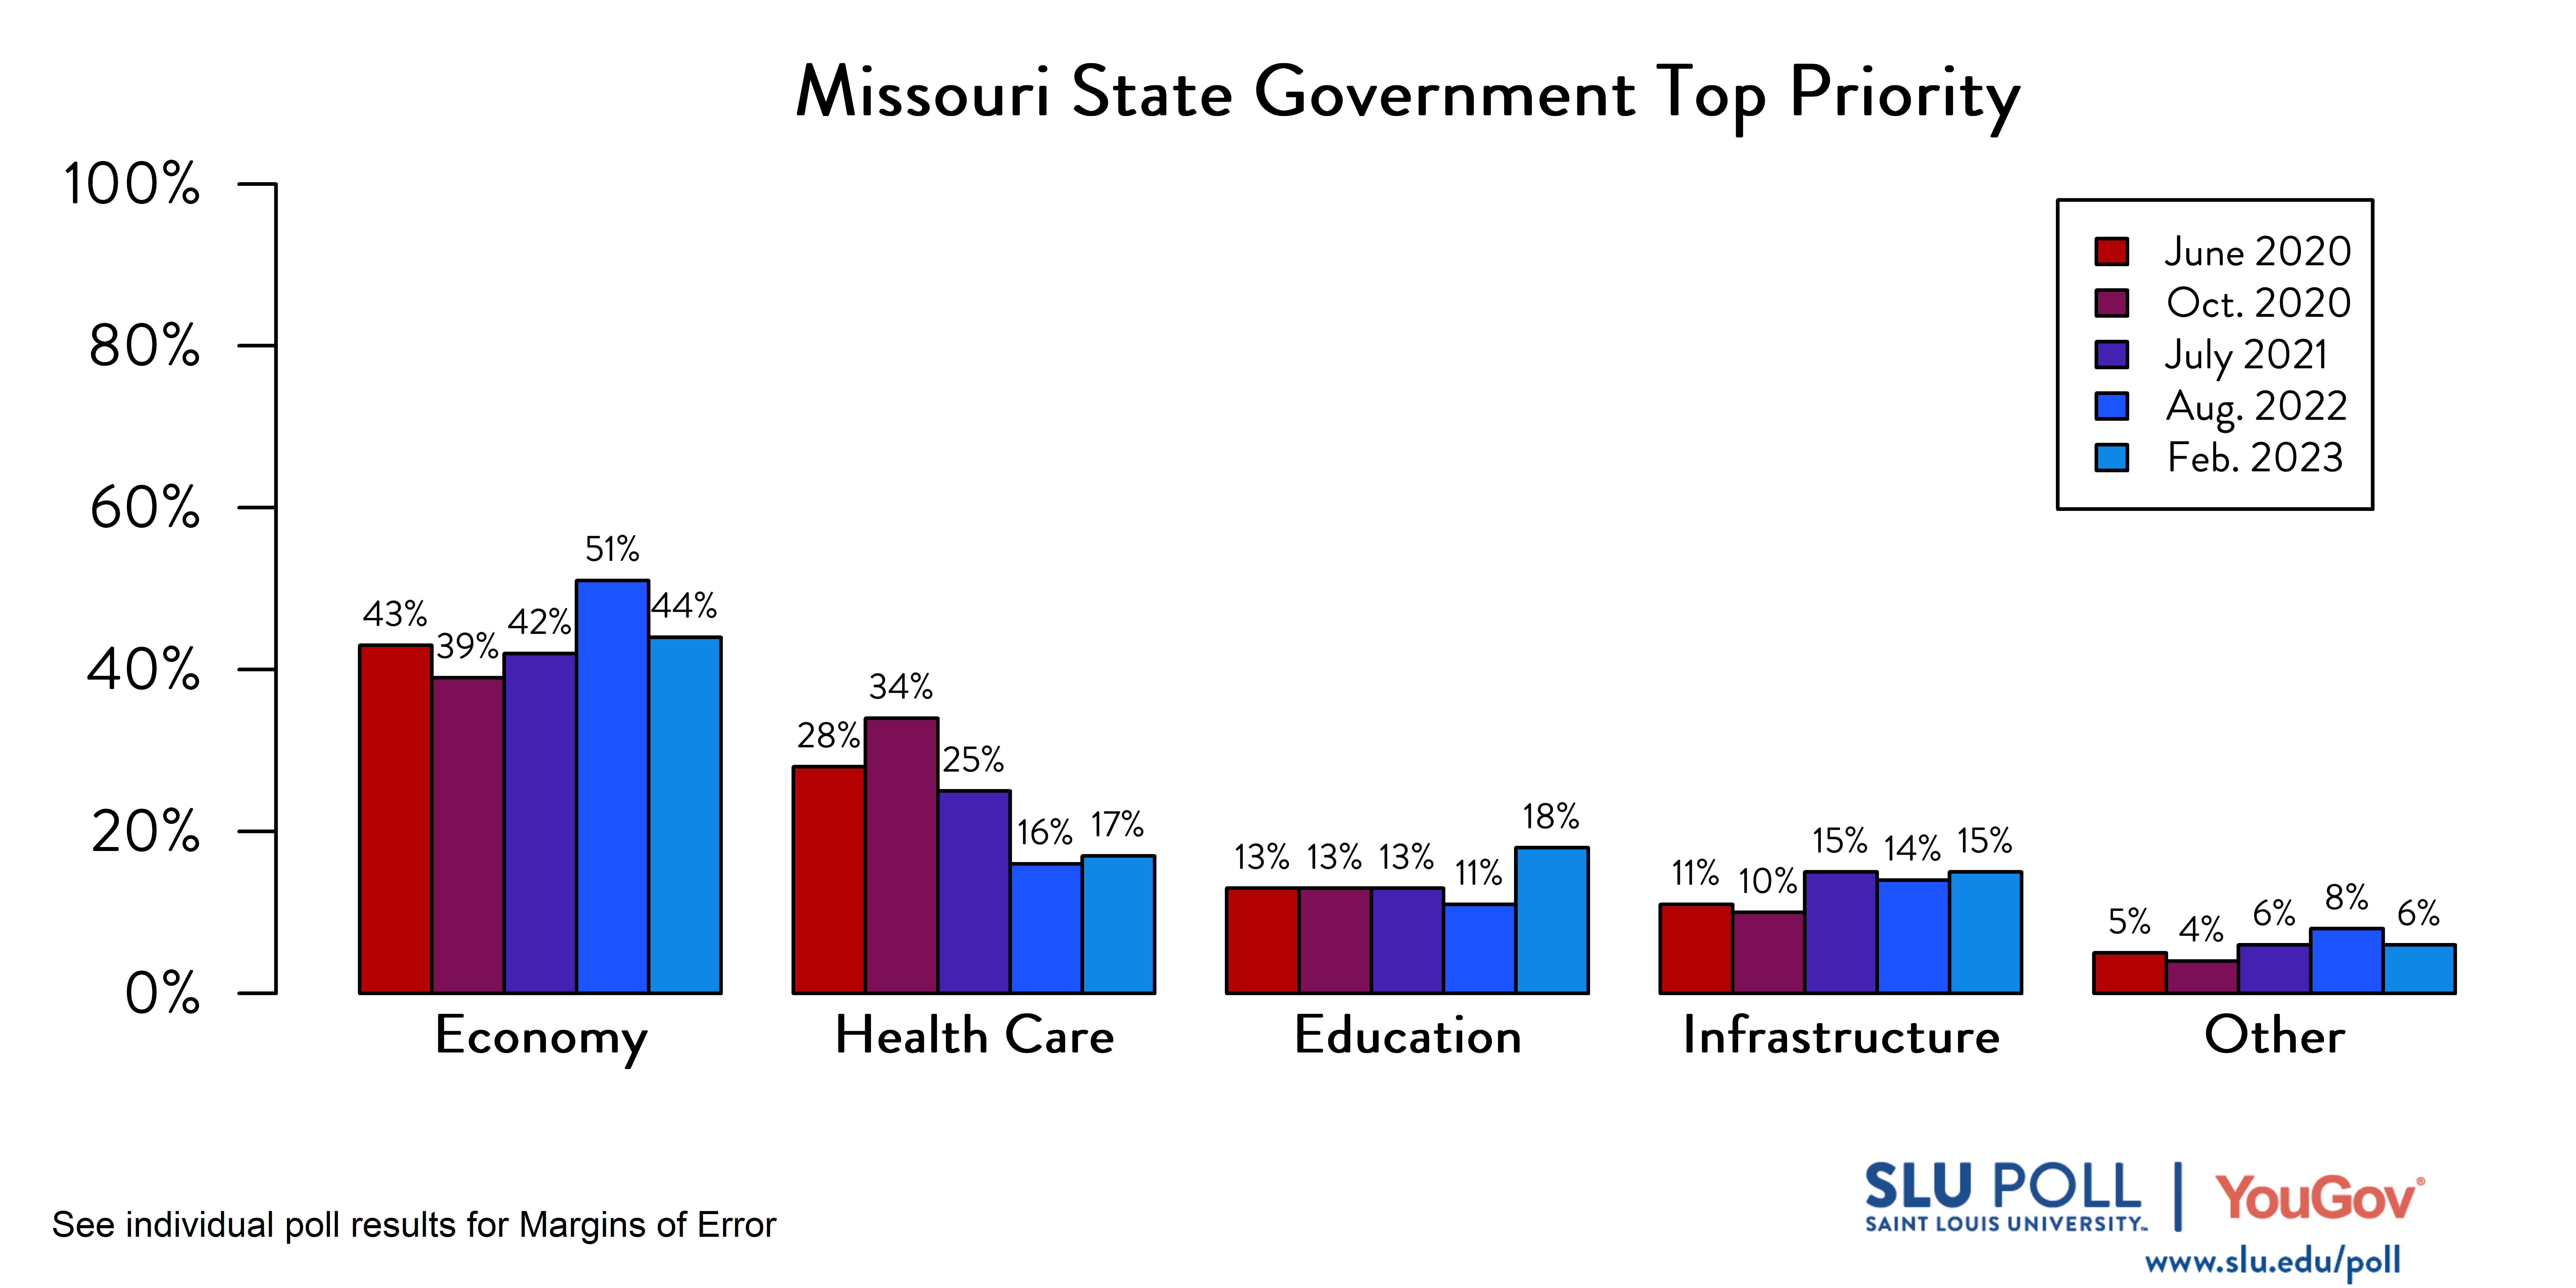 Likely voters' responses to 'Which of the following do you think should be the TOP priority of the Missouri state government?'. June 2020 Voter Responses 43% Economy, 28% Health Care, 13% Education, 11% Infrastructure, and 5% Other. October 2020 Voter Responses: 39% Economy, 34% Health care, 13% Education, 10% Infrastructure, and 4% Other. July 2021 Voter Responses: 42% Economy, 25% Health care, 13% Education, 15% Infrastructure, and 6% Other. August 2022 Voter Responses: 51% Economy, 16% Health care, 11% Education, 14% Infrastructure, and 8% Other. Februrary 2023 Voter Responses: 44% Economy, 17% Health care, 18% Education, 15% Infrastructure, and 6% Other.